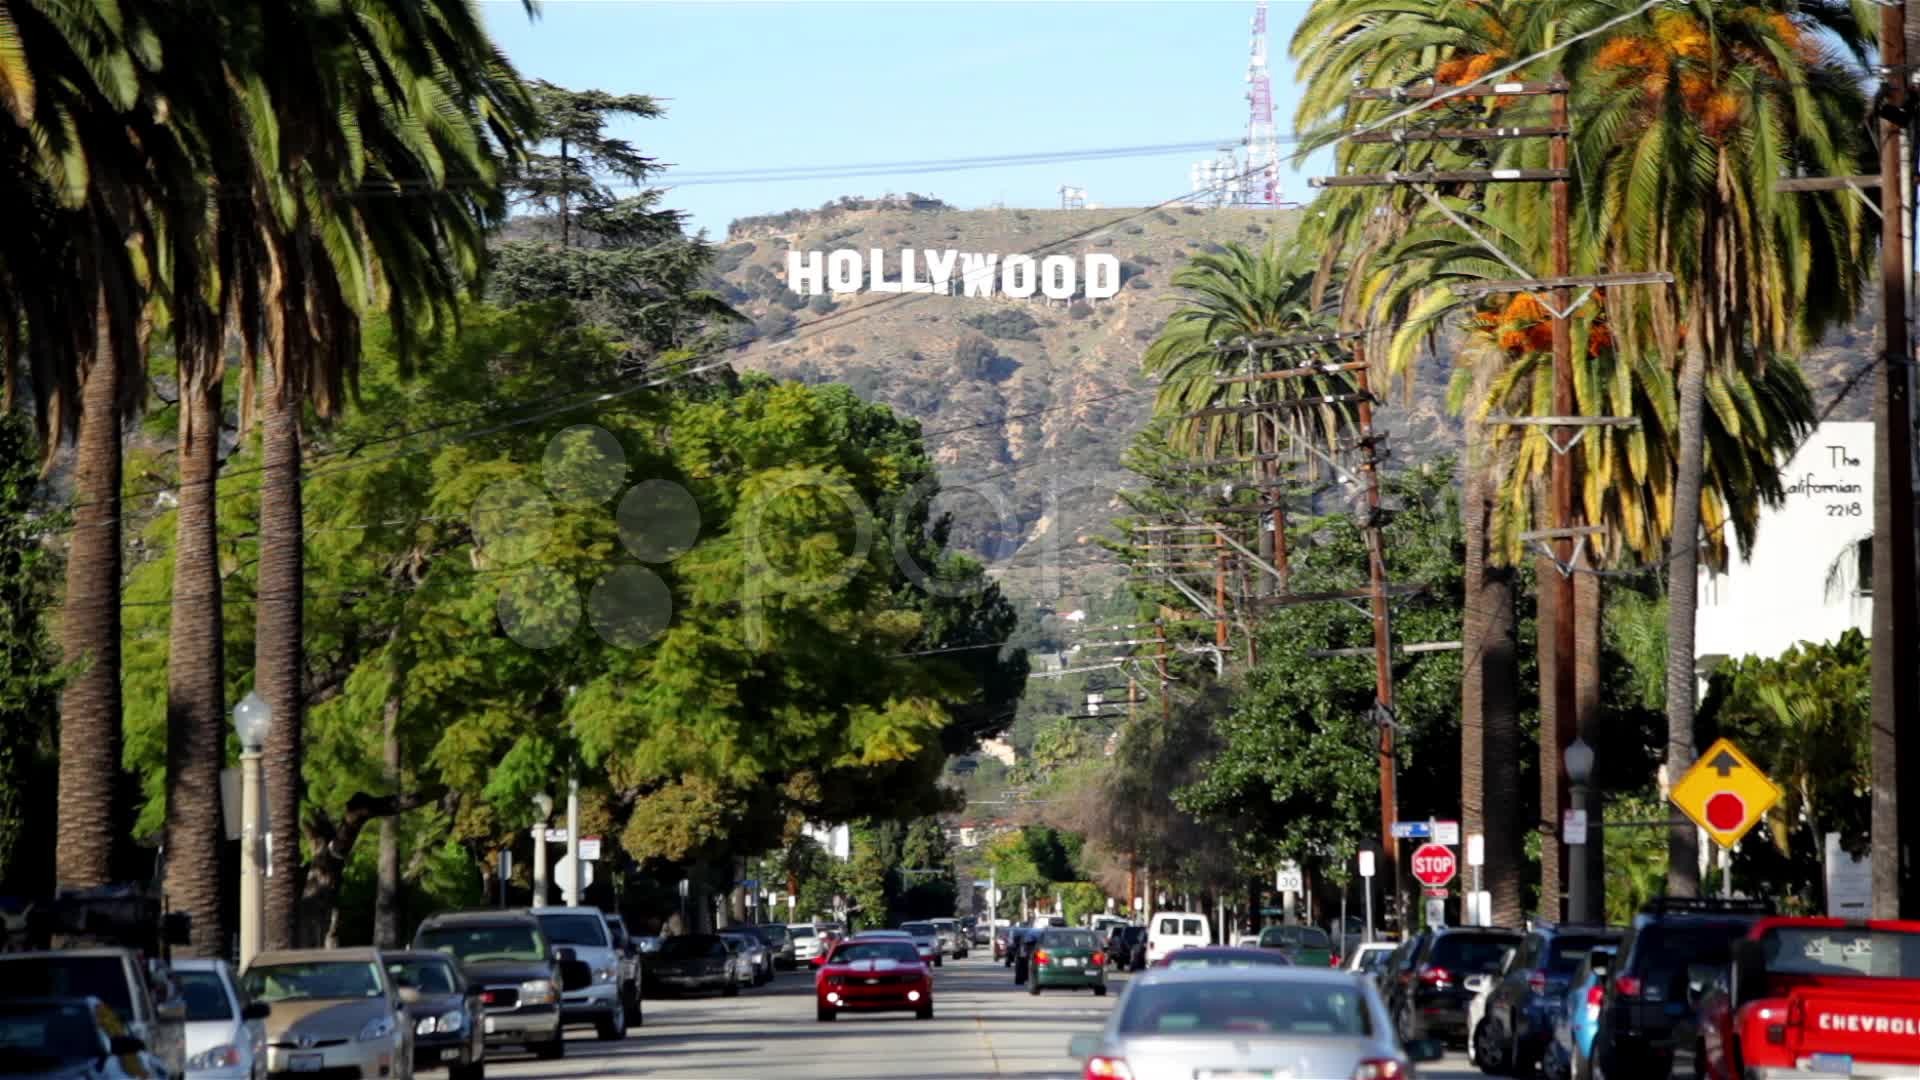 1920x1080 Cool Hollywood Sign Wallpaper Hollywood sign 12 hd 